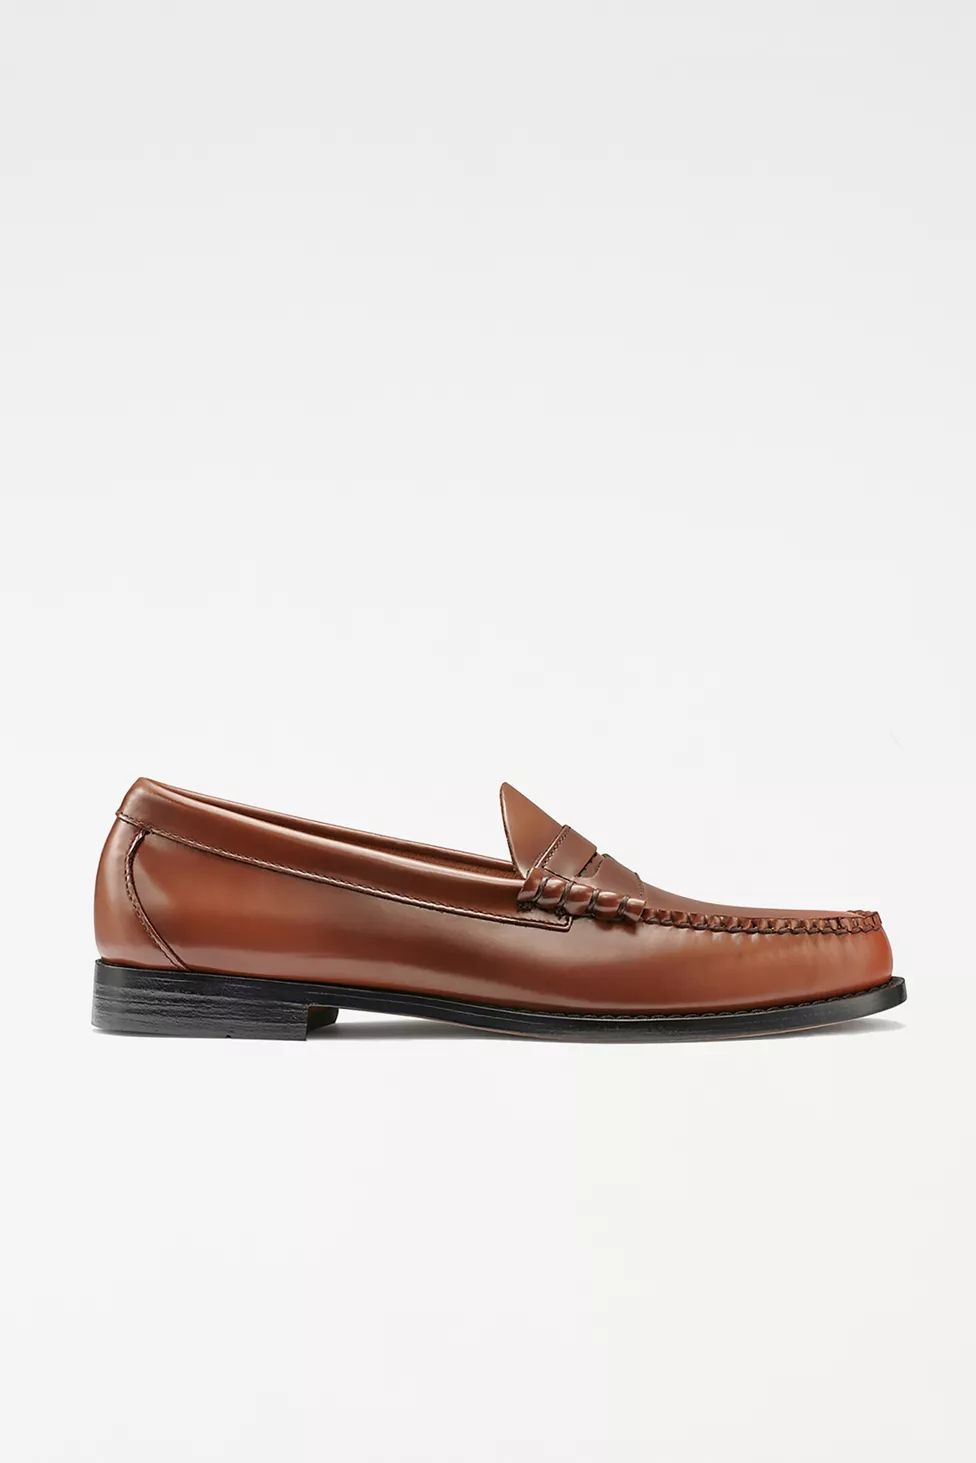 G.H.BASS Larson Weejuns® Loafer | Urban Outfitters (US and RoW)